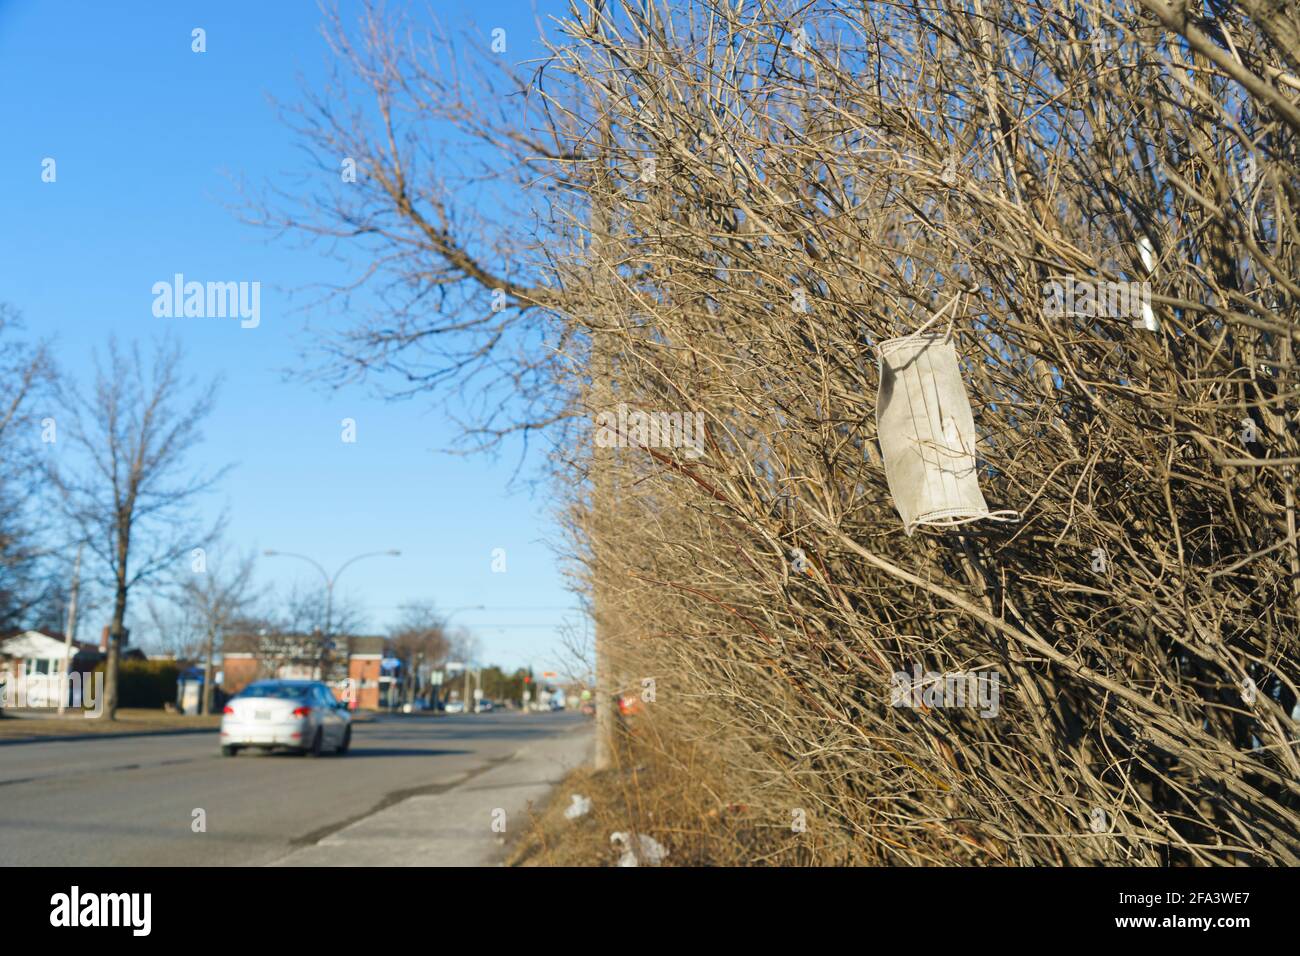 Face mask discarded in  a bush during the Covid-19 pandemic. Stock Photo